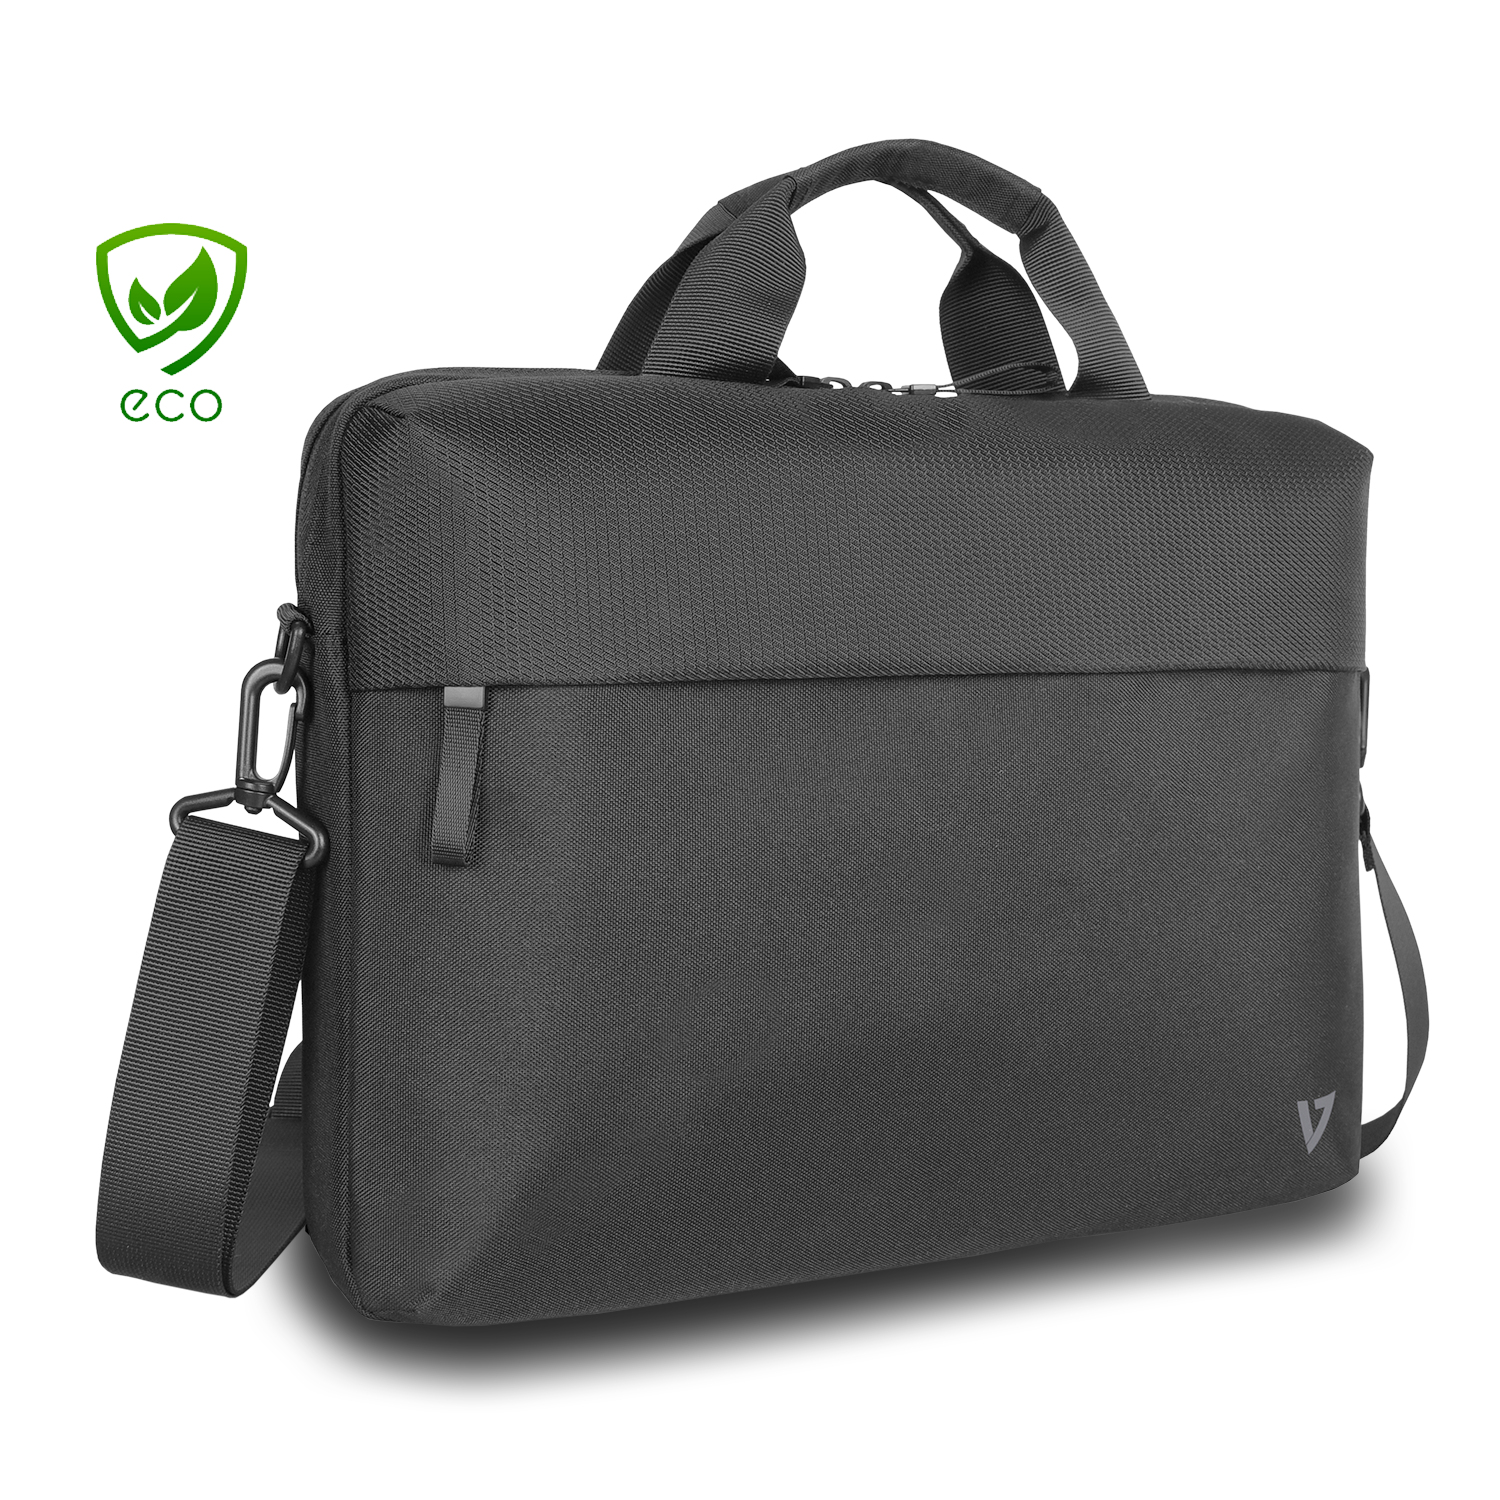 V7 - Bags                        16in Ecofriendly Rpet Briefcase     Topload Professional Black          Ctp16-eco2